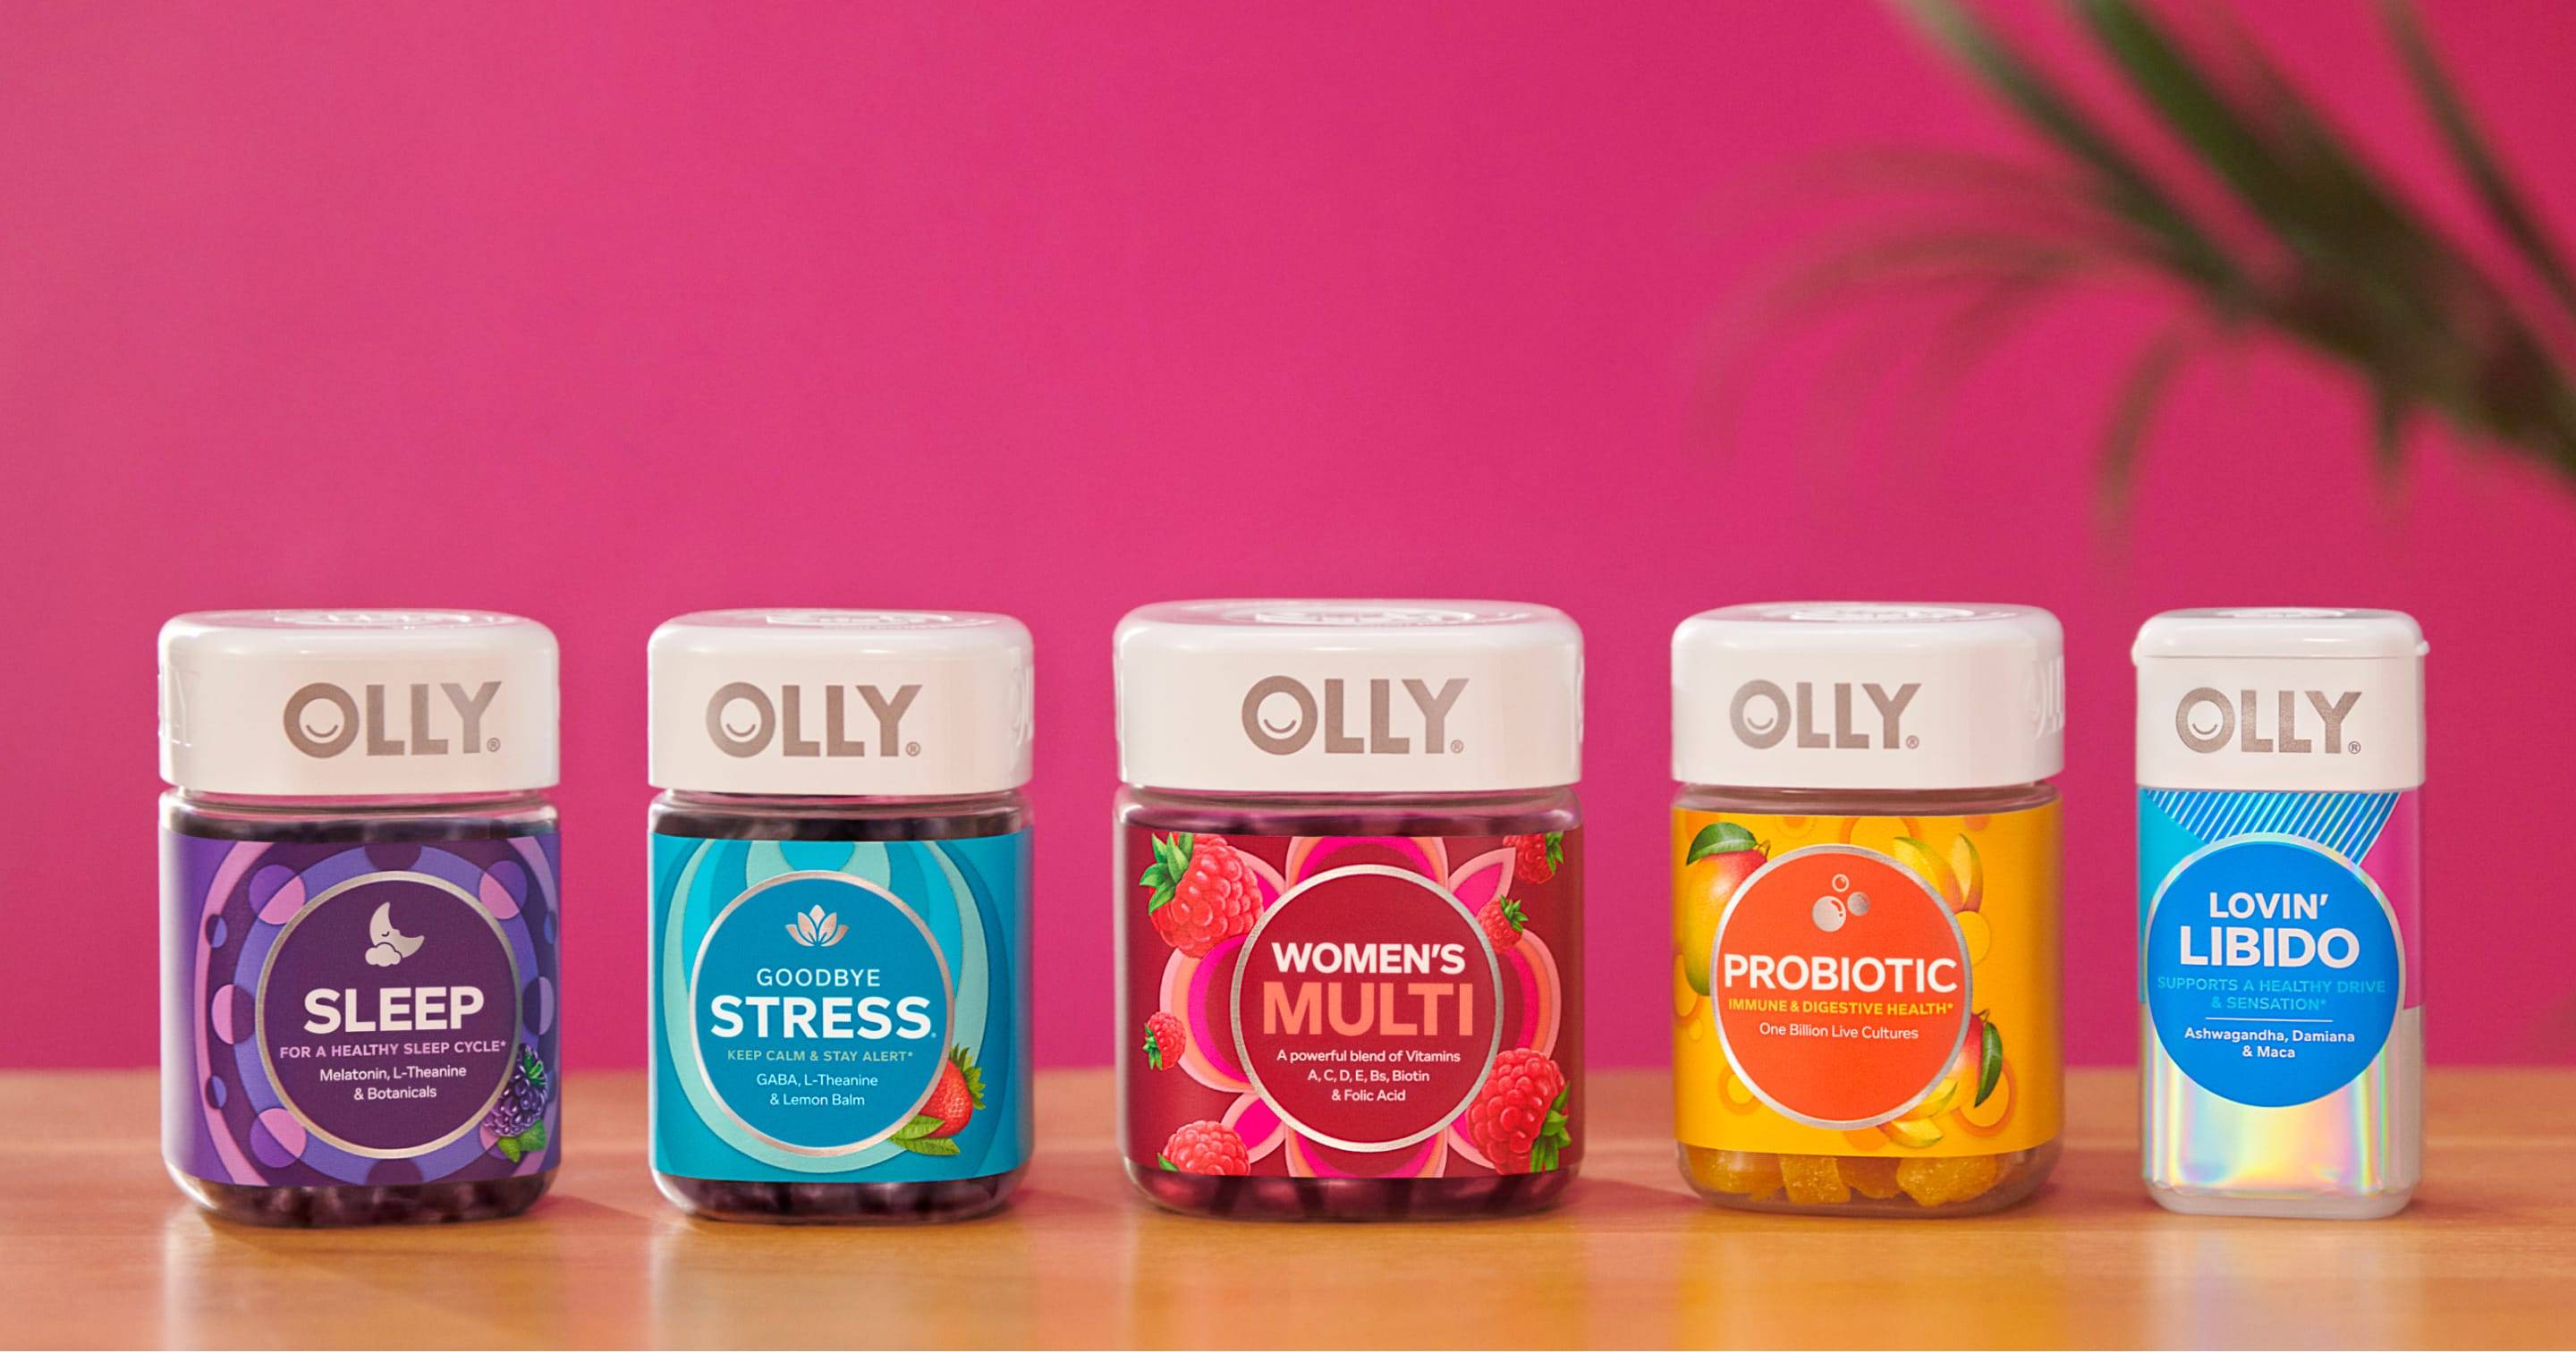 5 products on a table – OLLY Sleep, OLLY Goodbye Stress, OLLY Women’s Multi, OLLY Probiotic and OLLY Lovin’ Libido